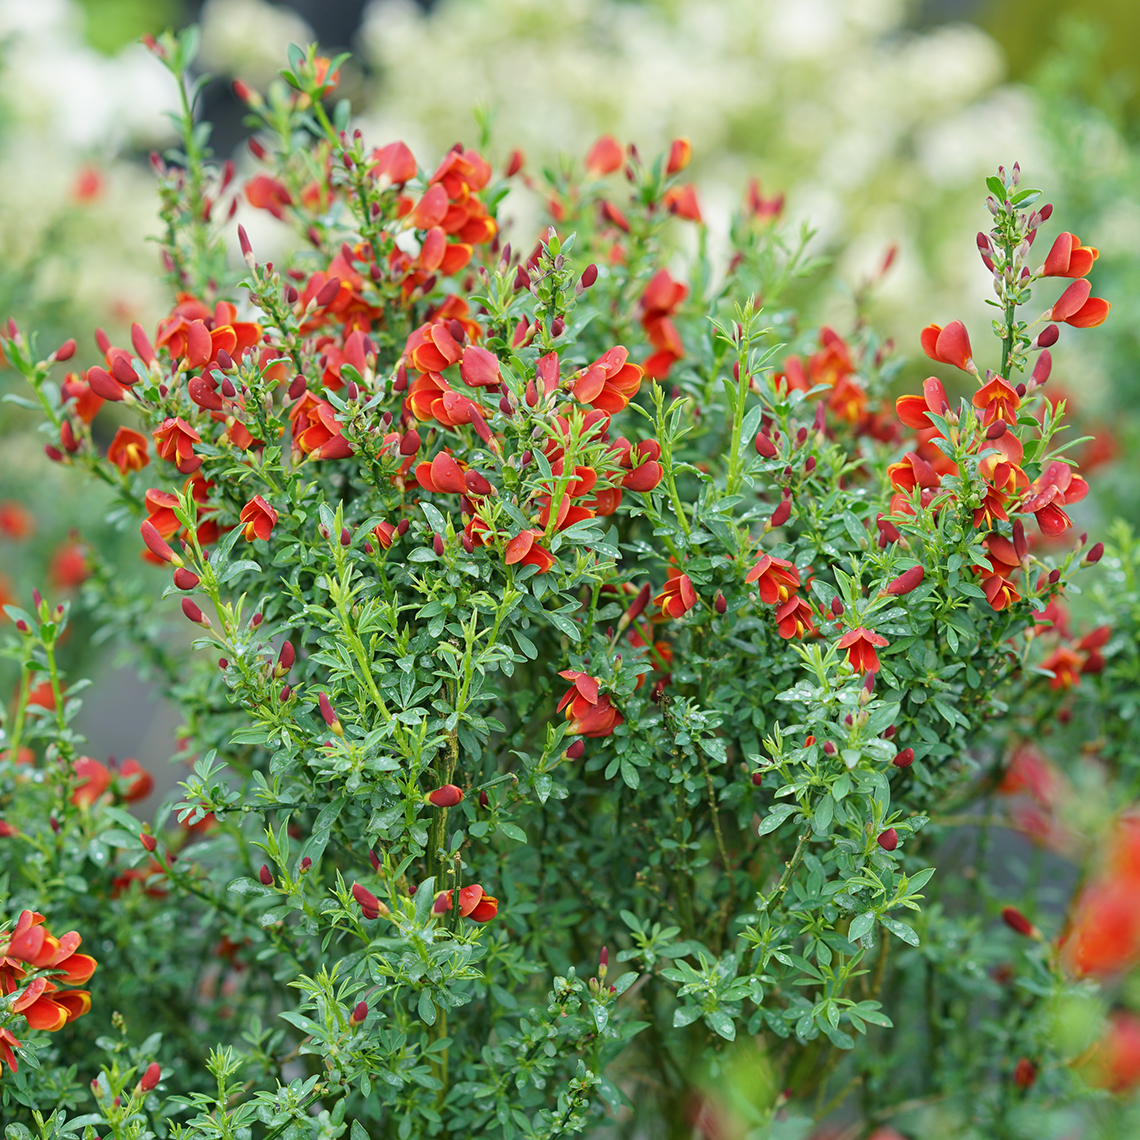 Upright branches of Sister Redhead Cytisus dotted with red blooms